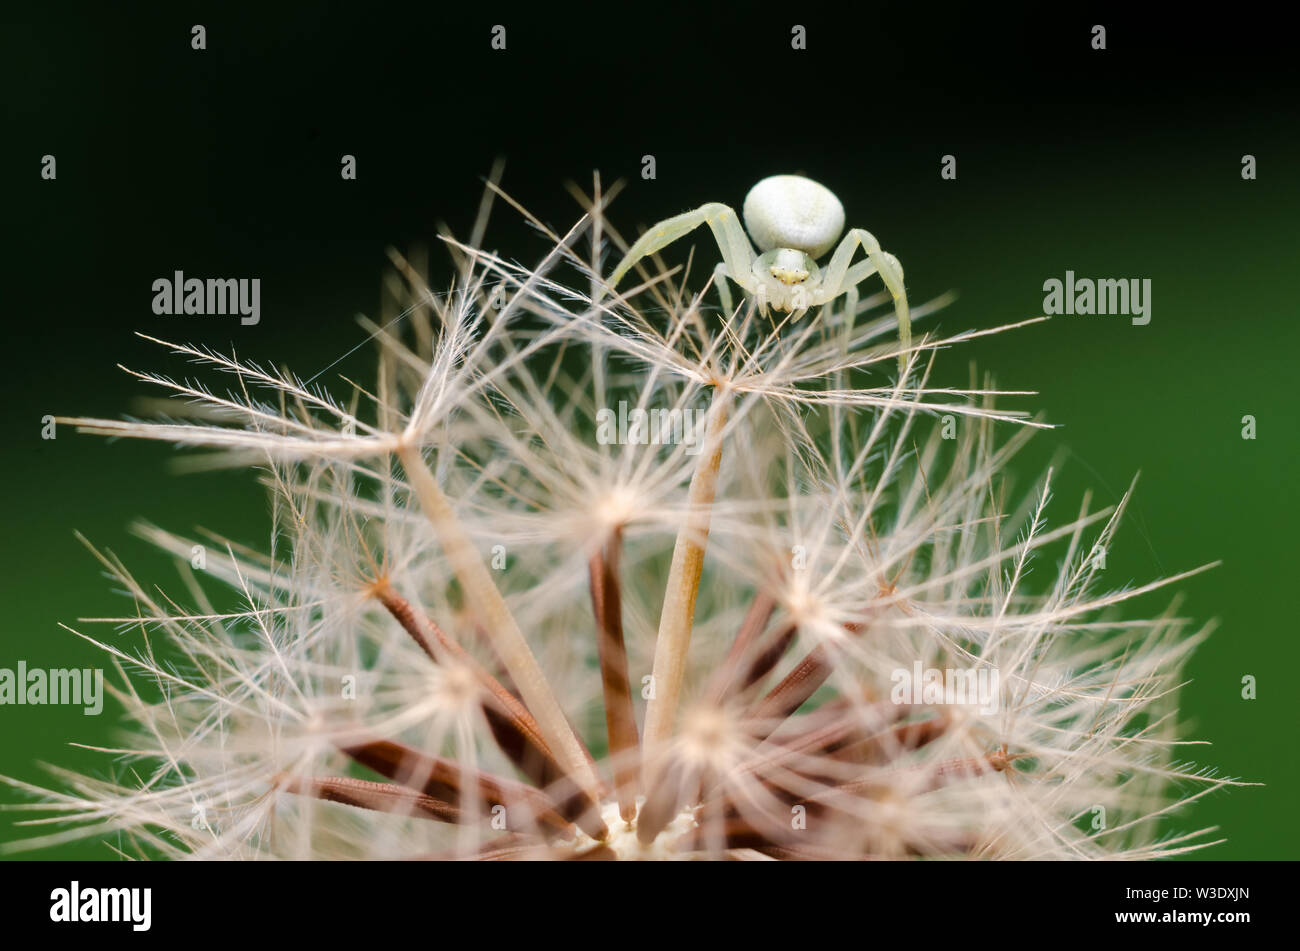 Thomisidae, Macro photograph of a tiny crab spider on a dandelion flower Stock Photo